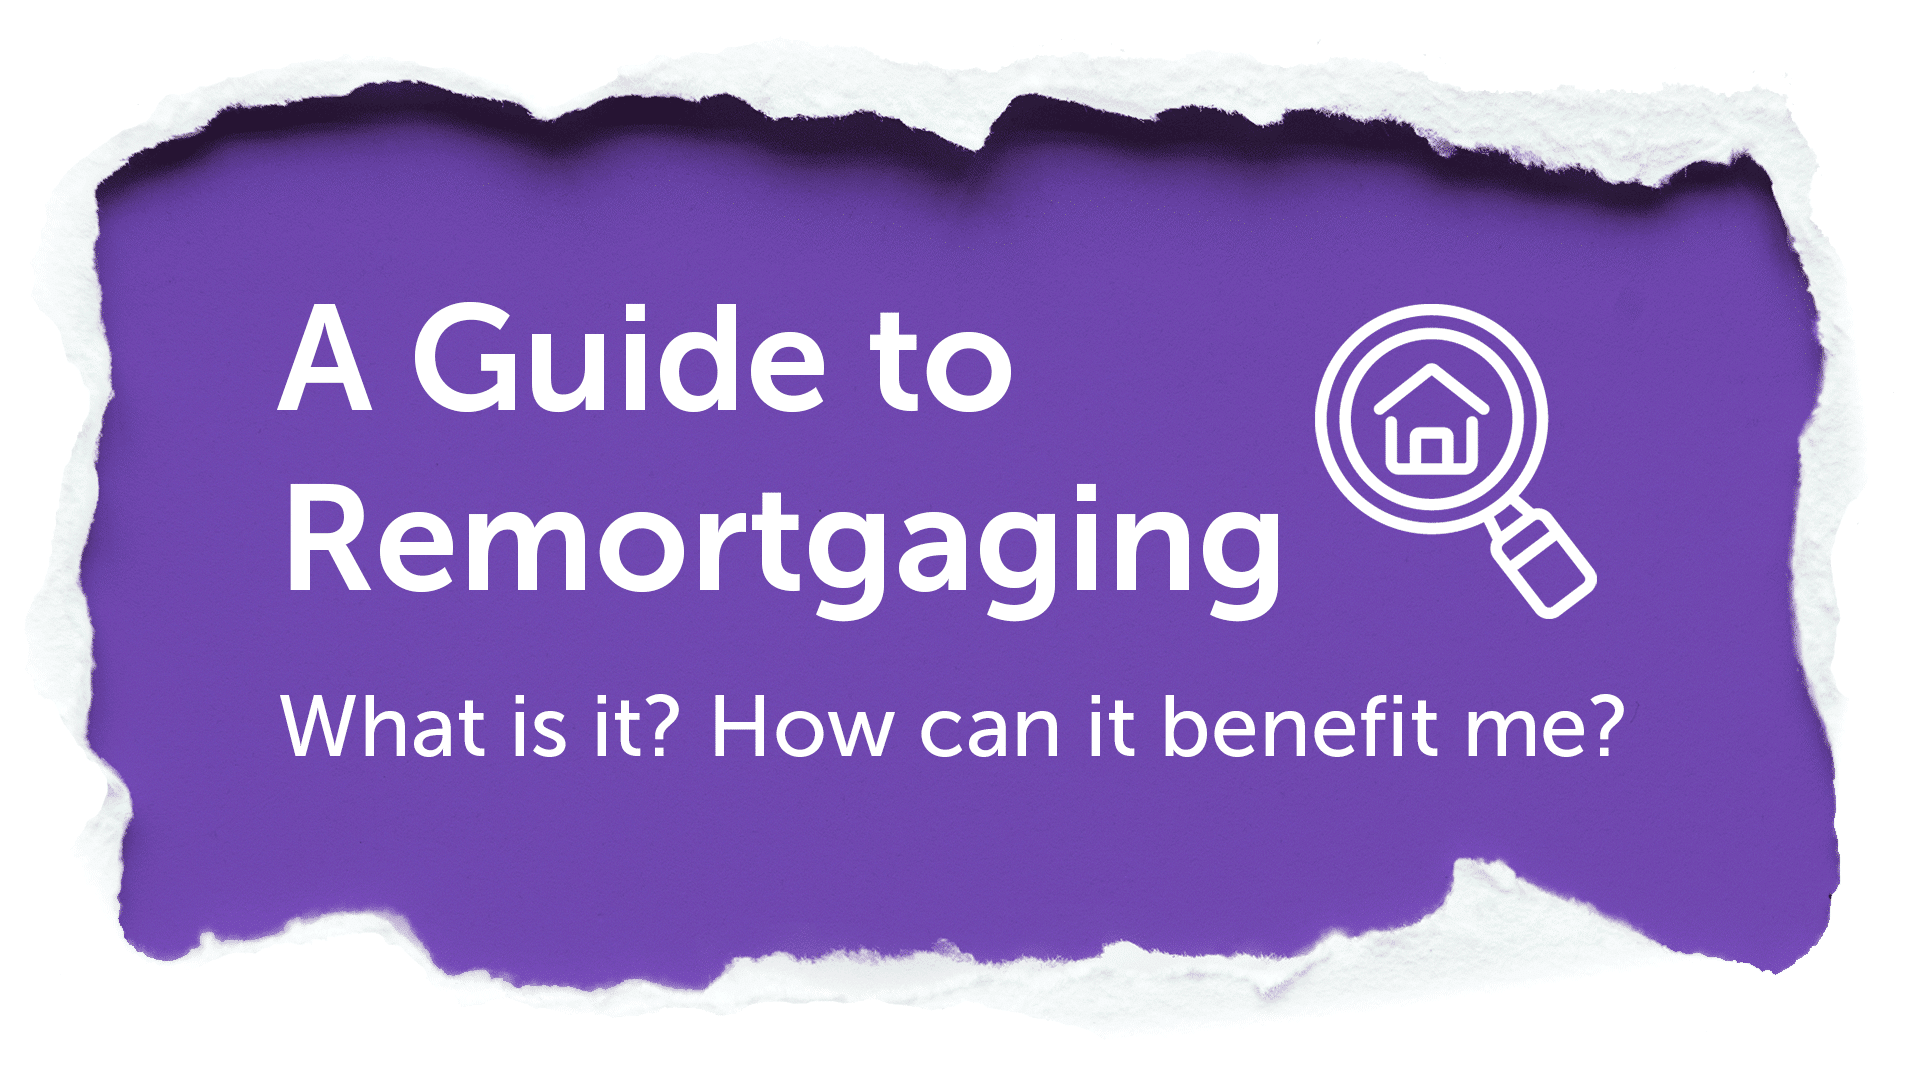 A Guide to Remortgaging in York